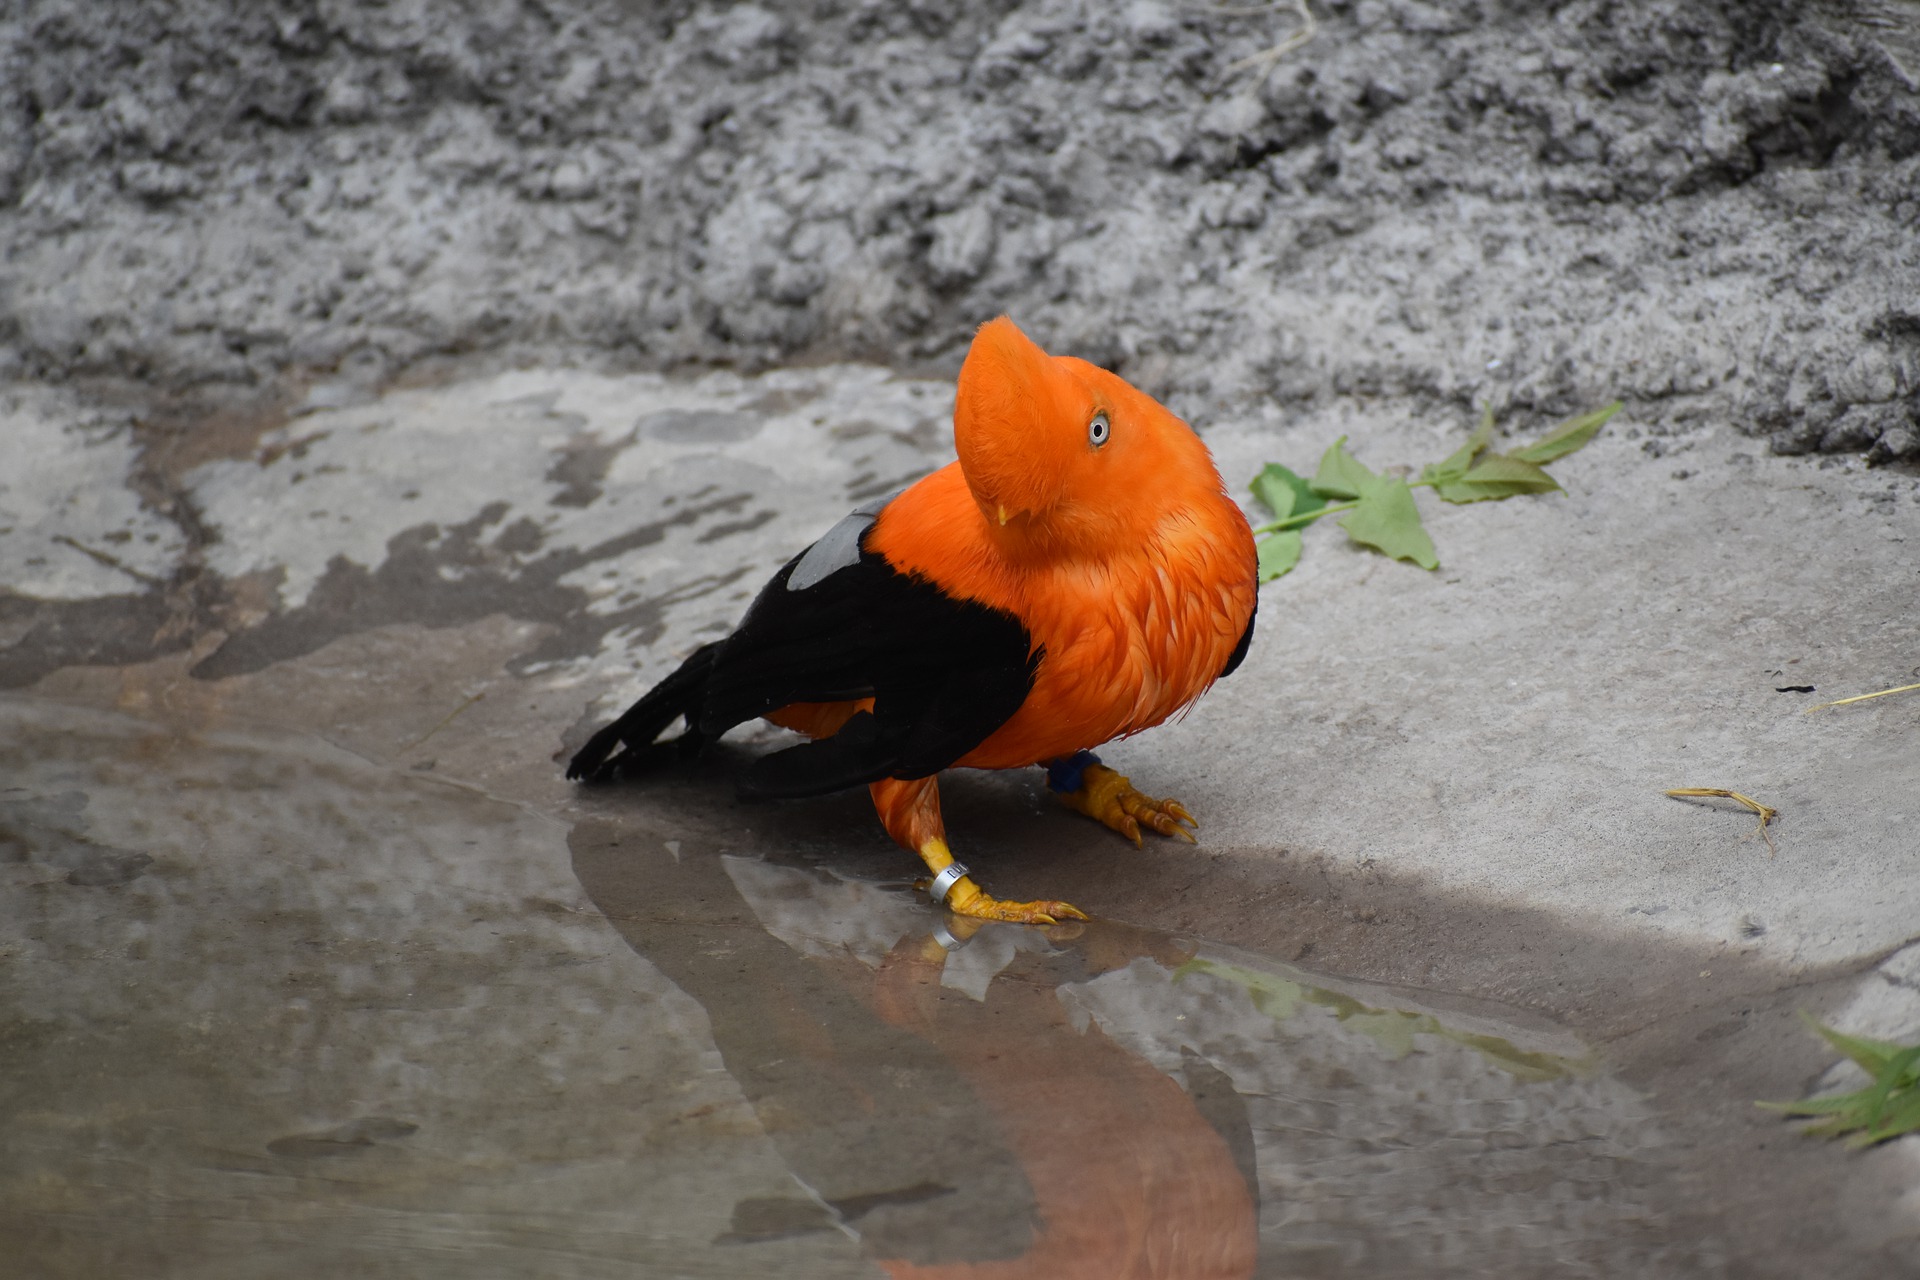 Andean cock-of-the-rock bird, found in Mindo